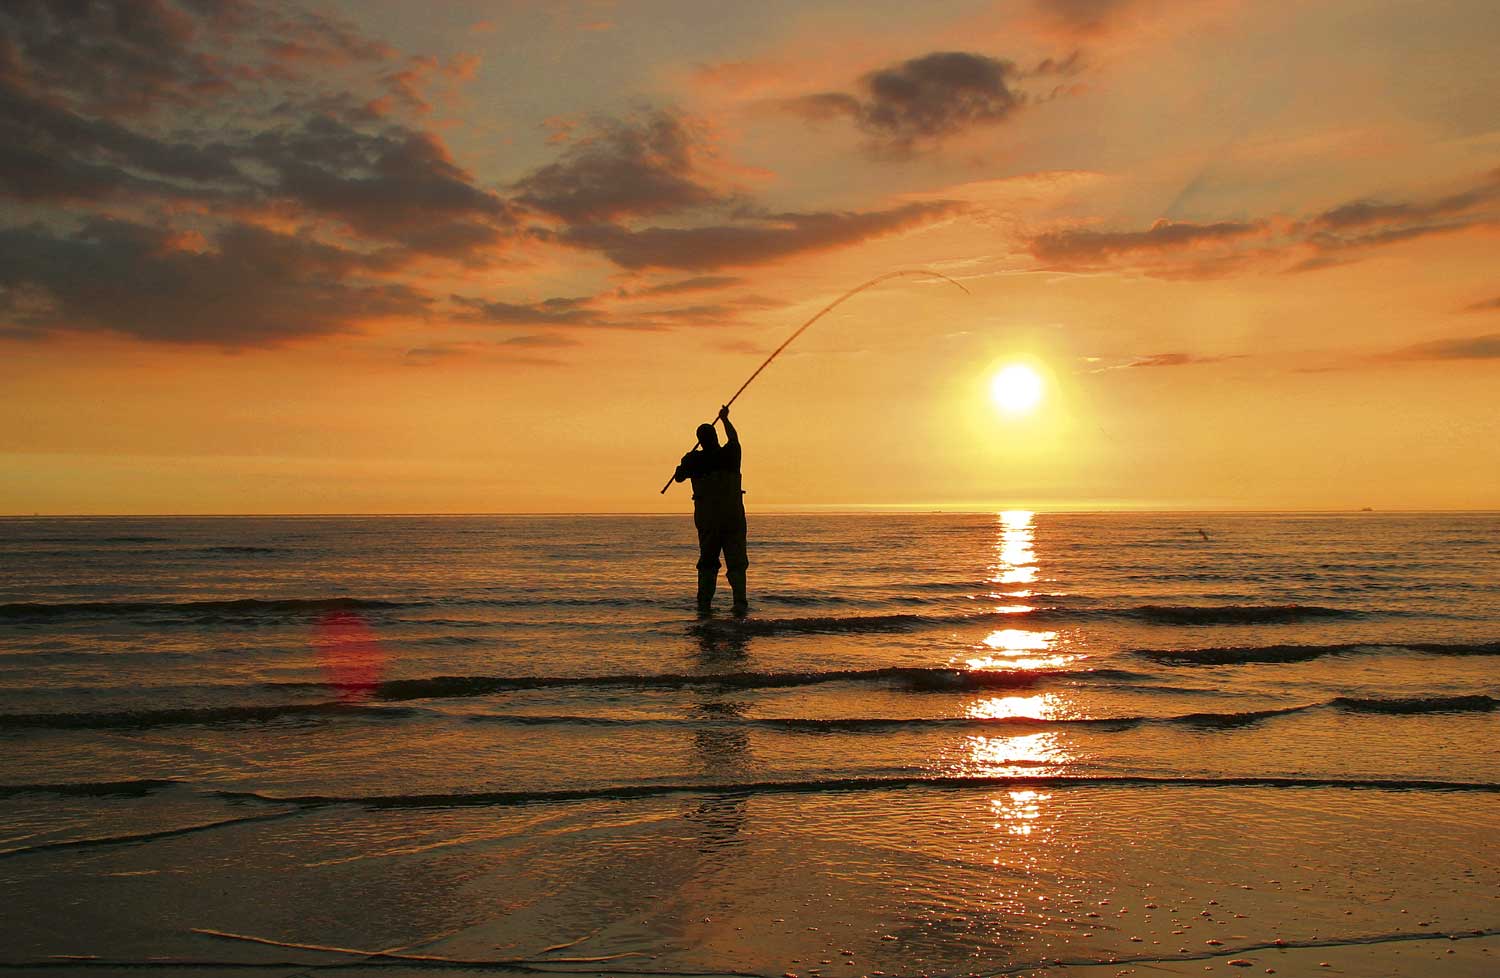 Beach Fishing for Summer Smoothhounds at Cleveleys Near Blackpool